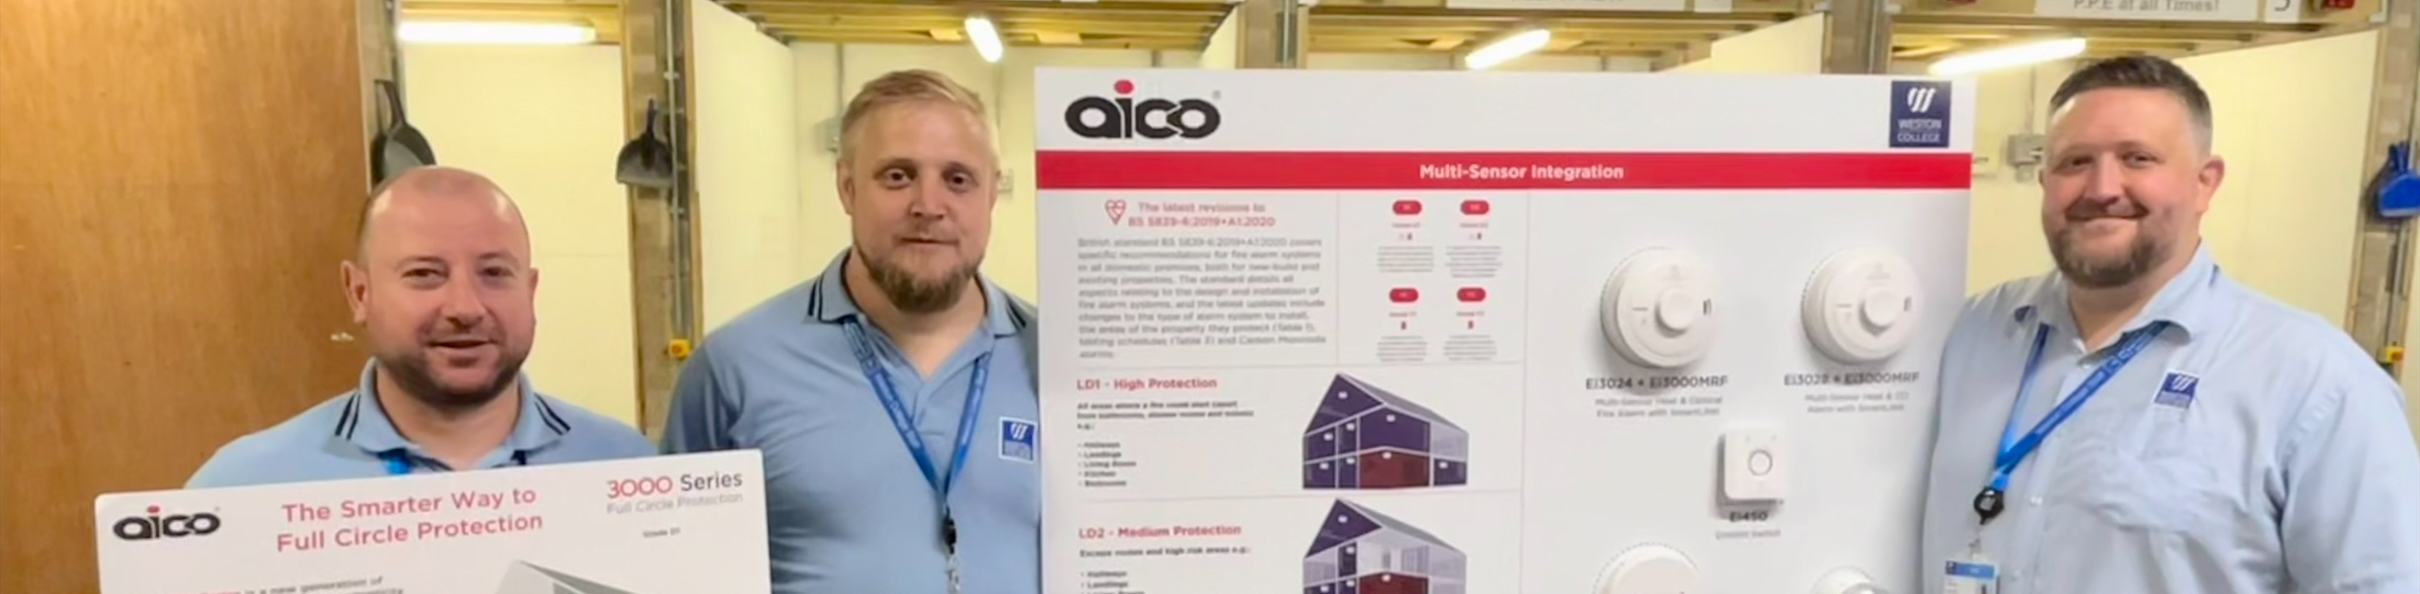 Alex, Lee and Andy holding Aico promotional board